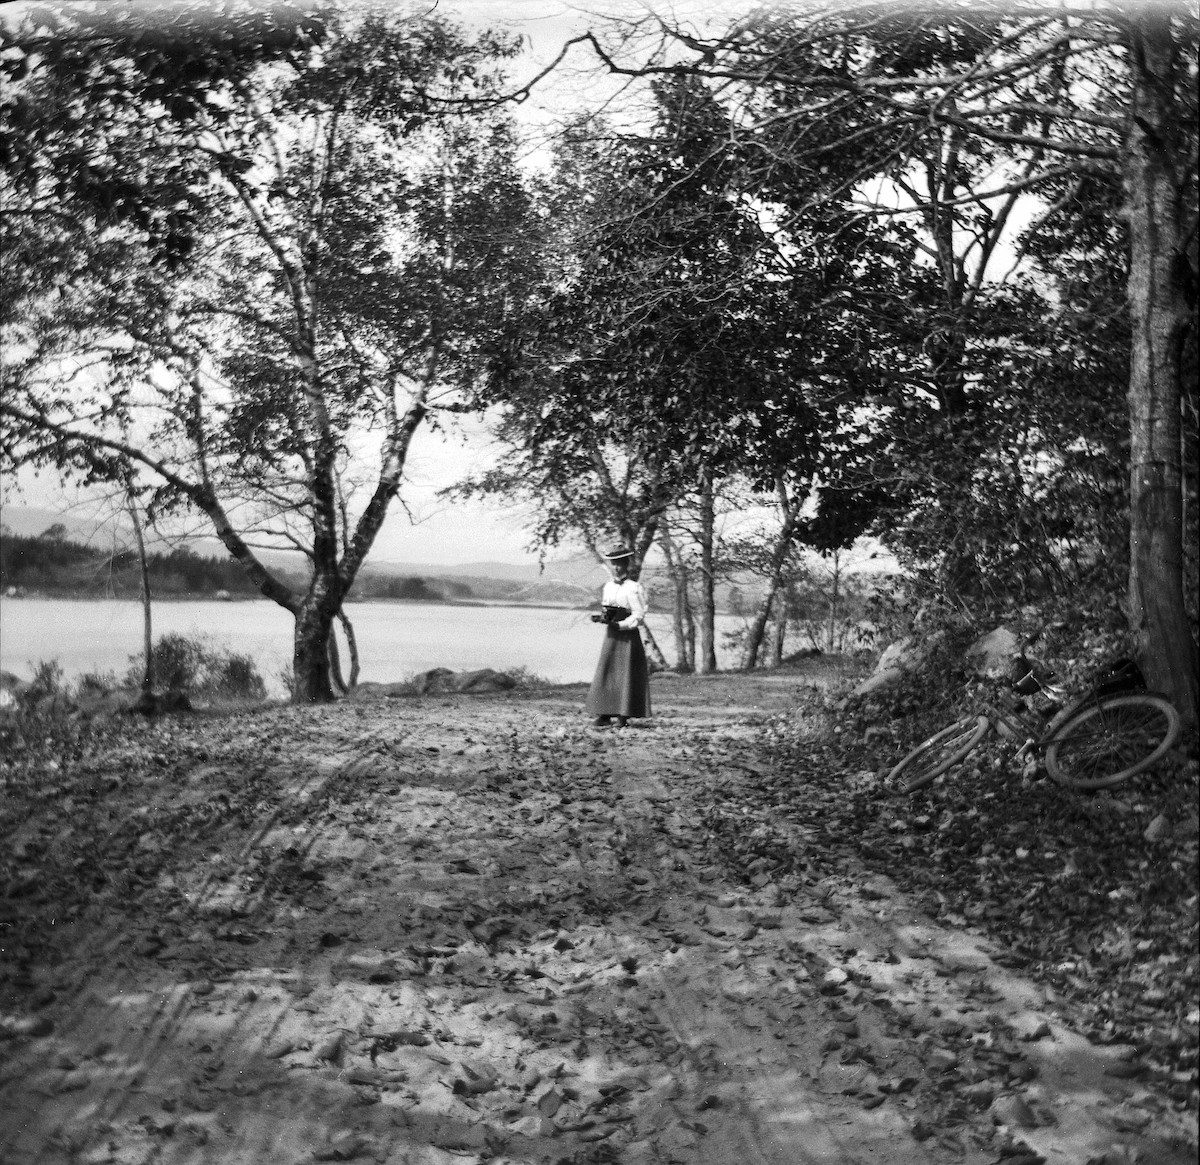 Woman walking along Turnpike Drive (now Rt. 52) in October 1899. She is carrying a camera and has a dog and bicycle with her.